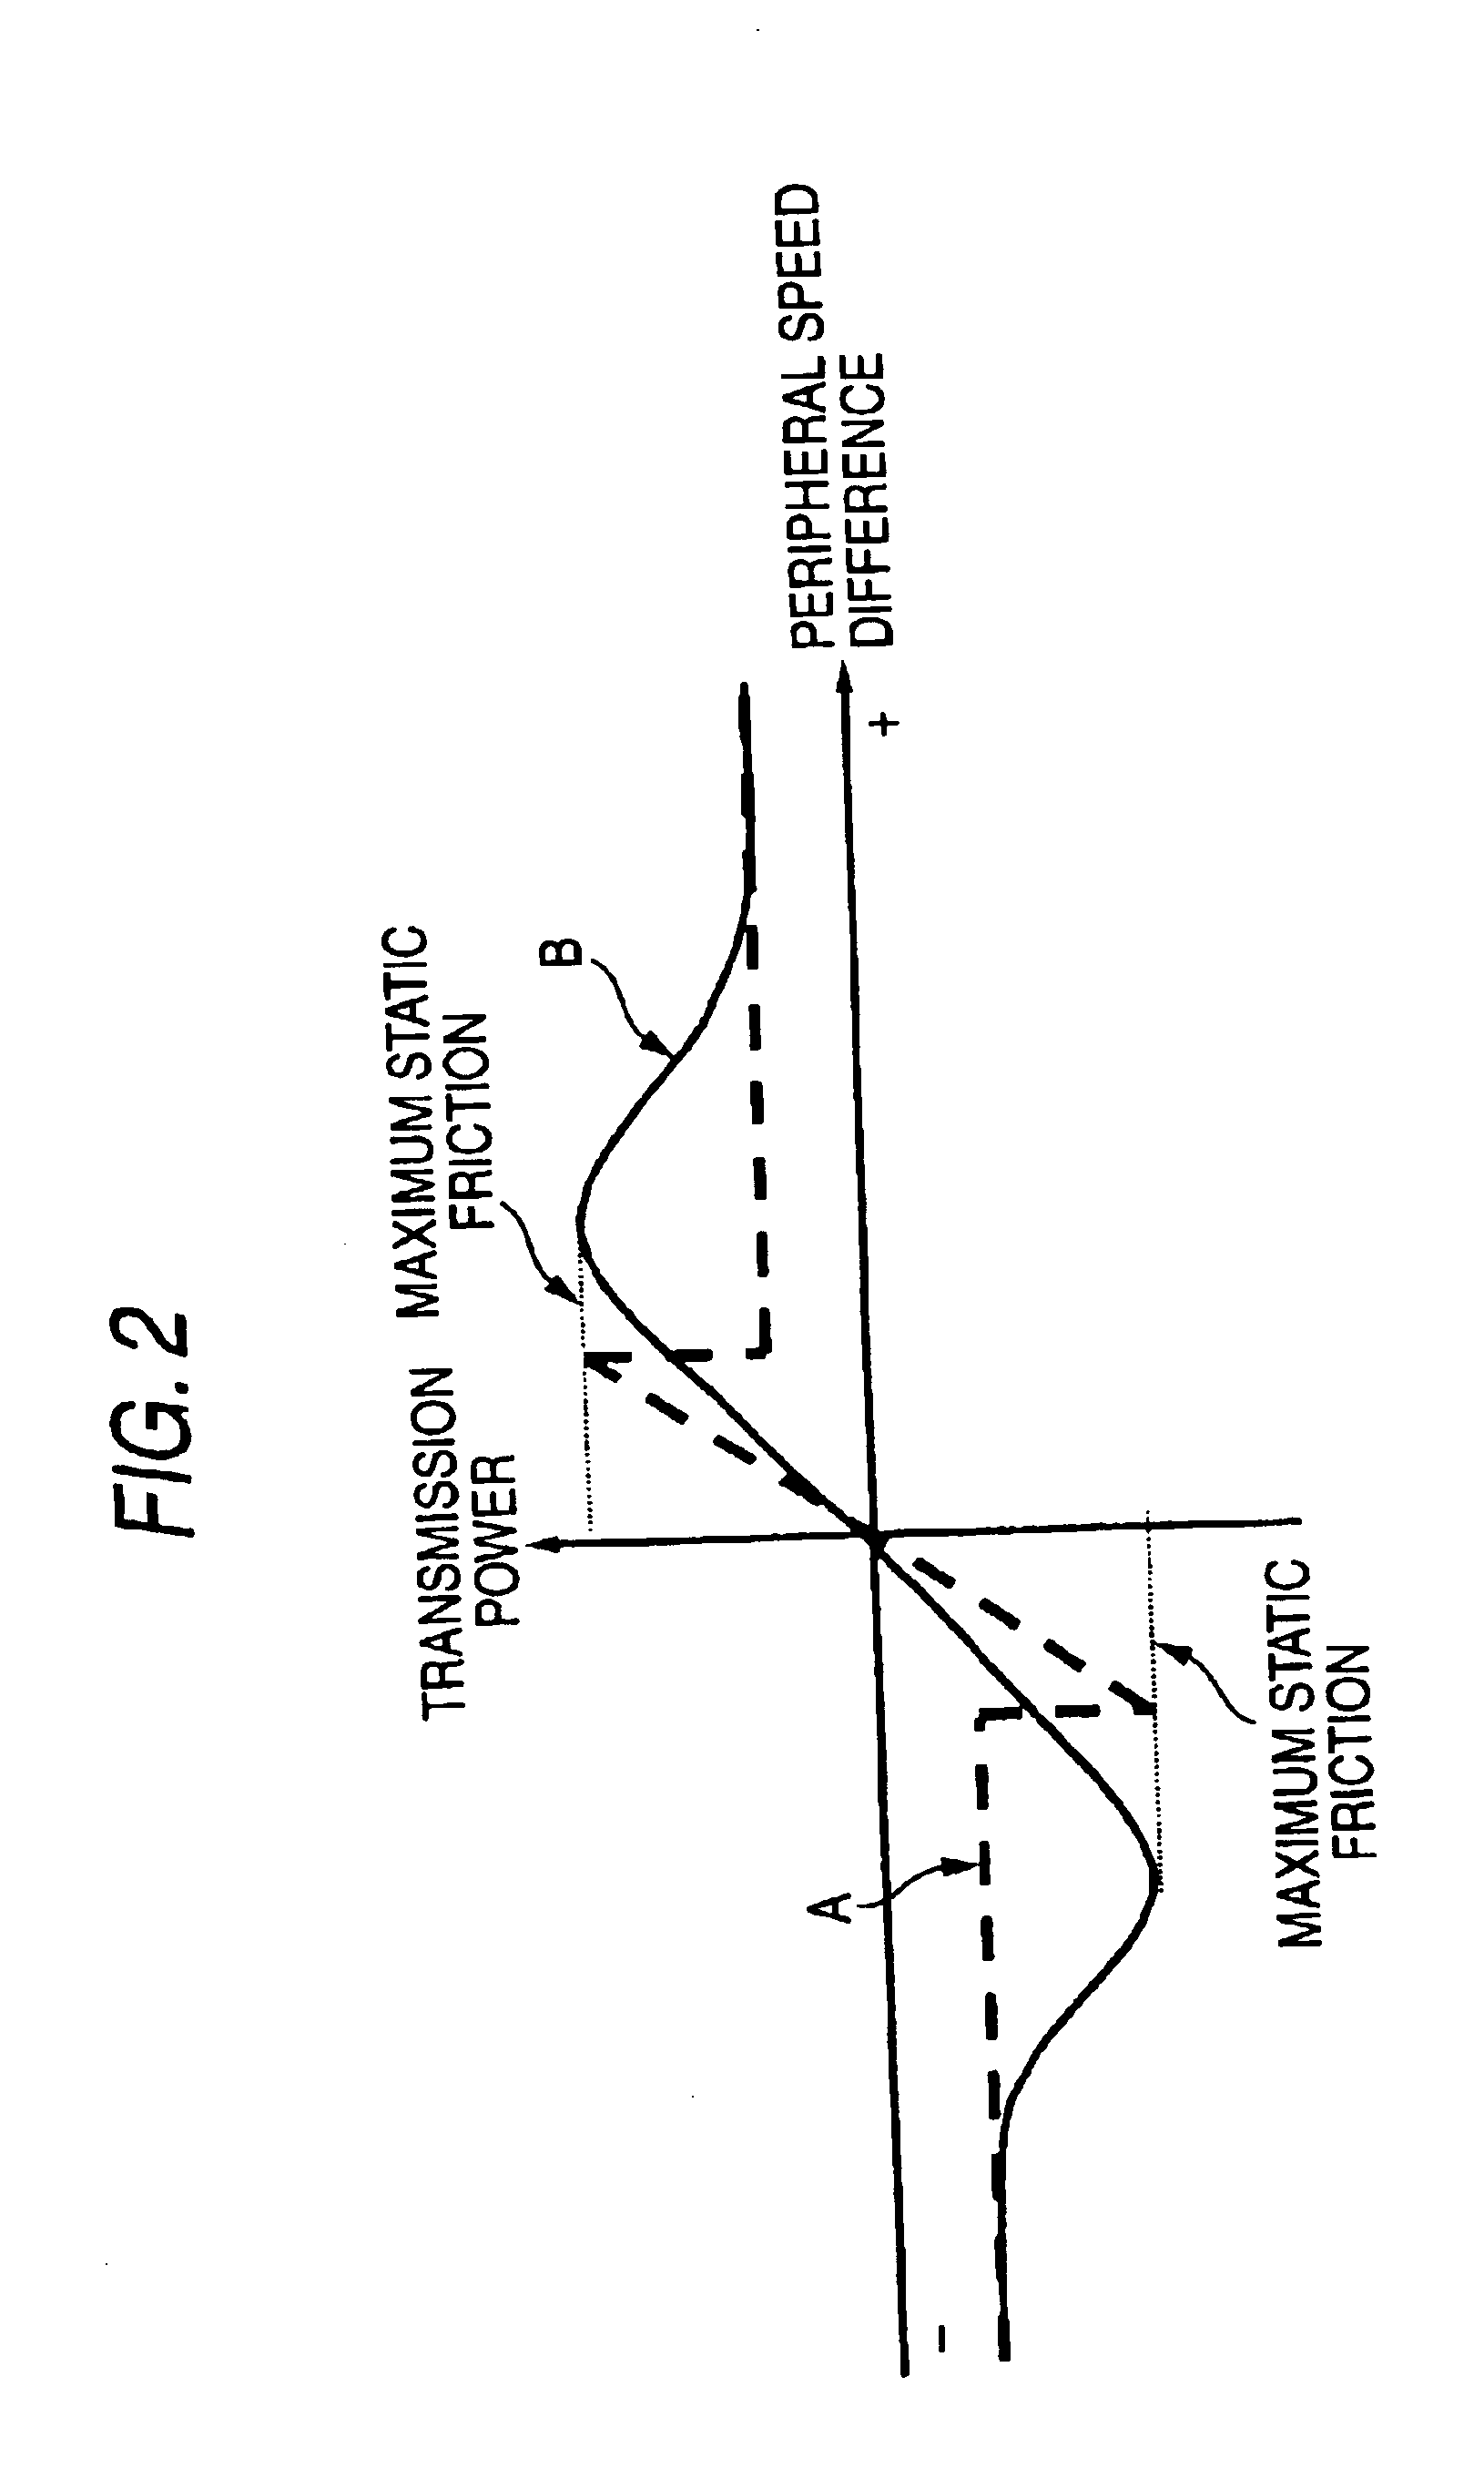 Image forming apparatus including image transporting belt and rotary roll